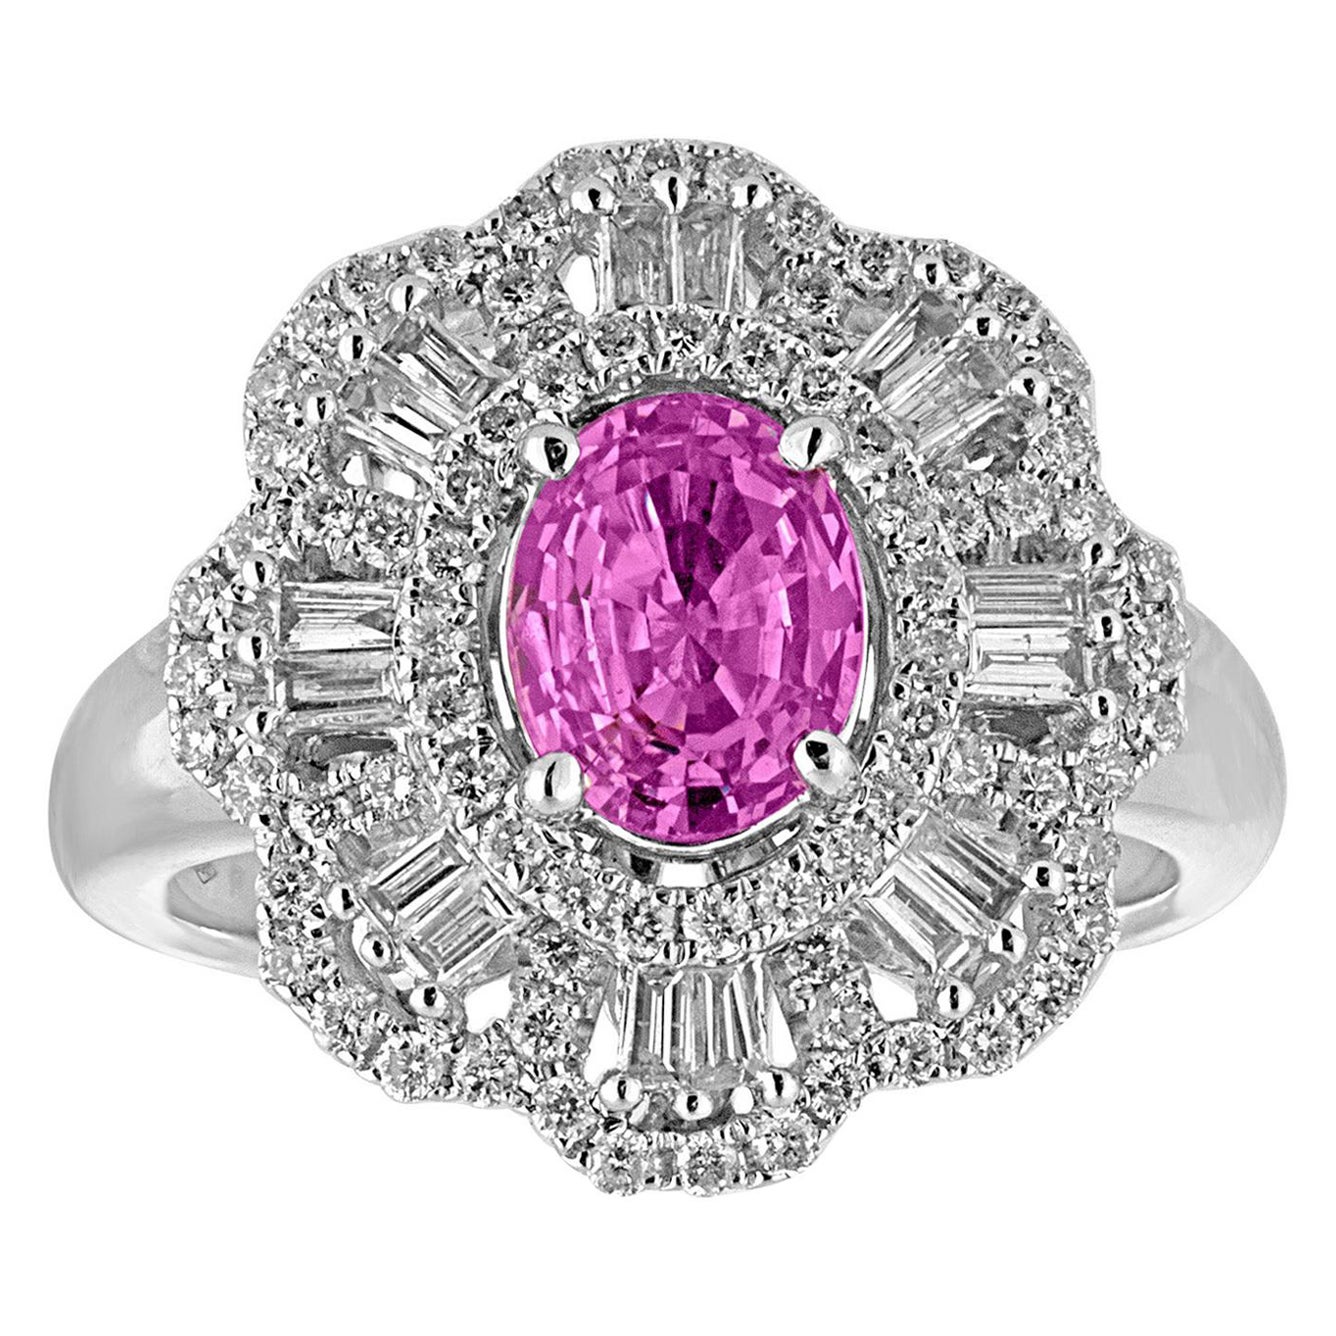 Certified 1.27 Carat Oval Pink Sapphire Diamond Gold Ring For Sale